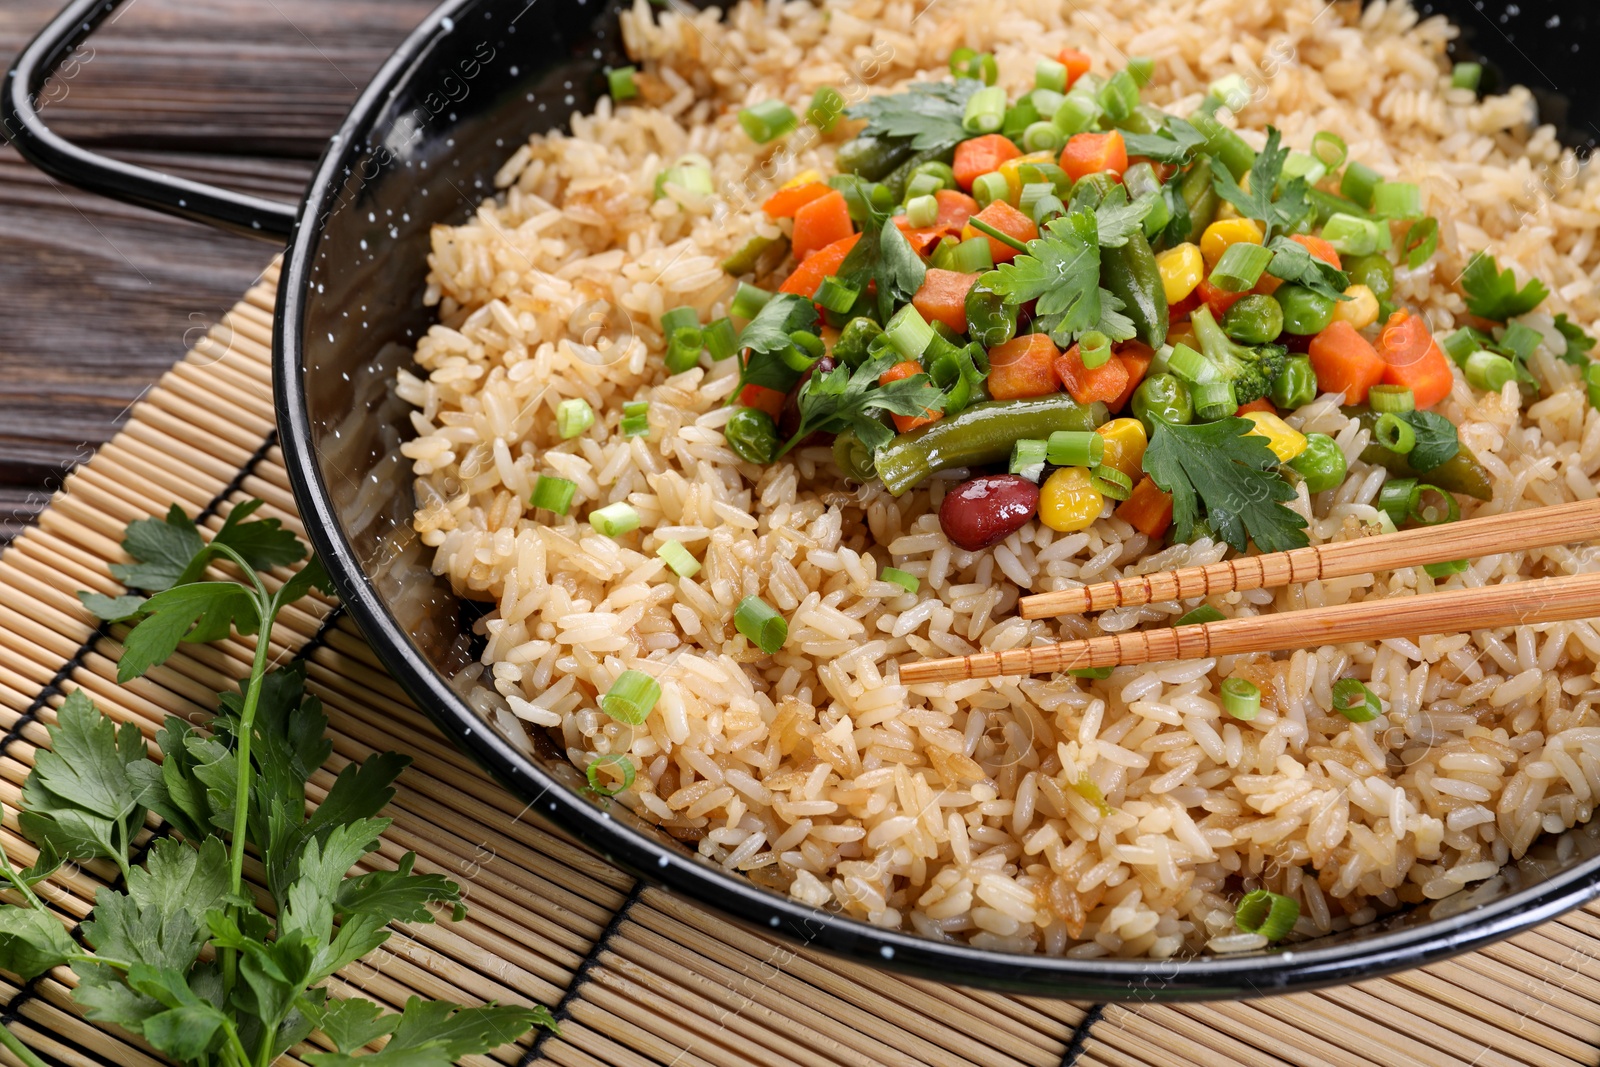 Photo of Tasty fried rice with vegetables served on wooden table, closeup